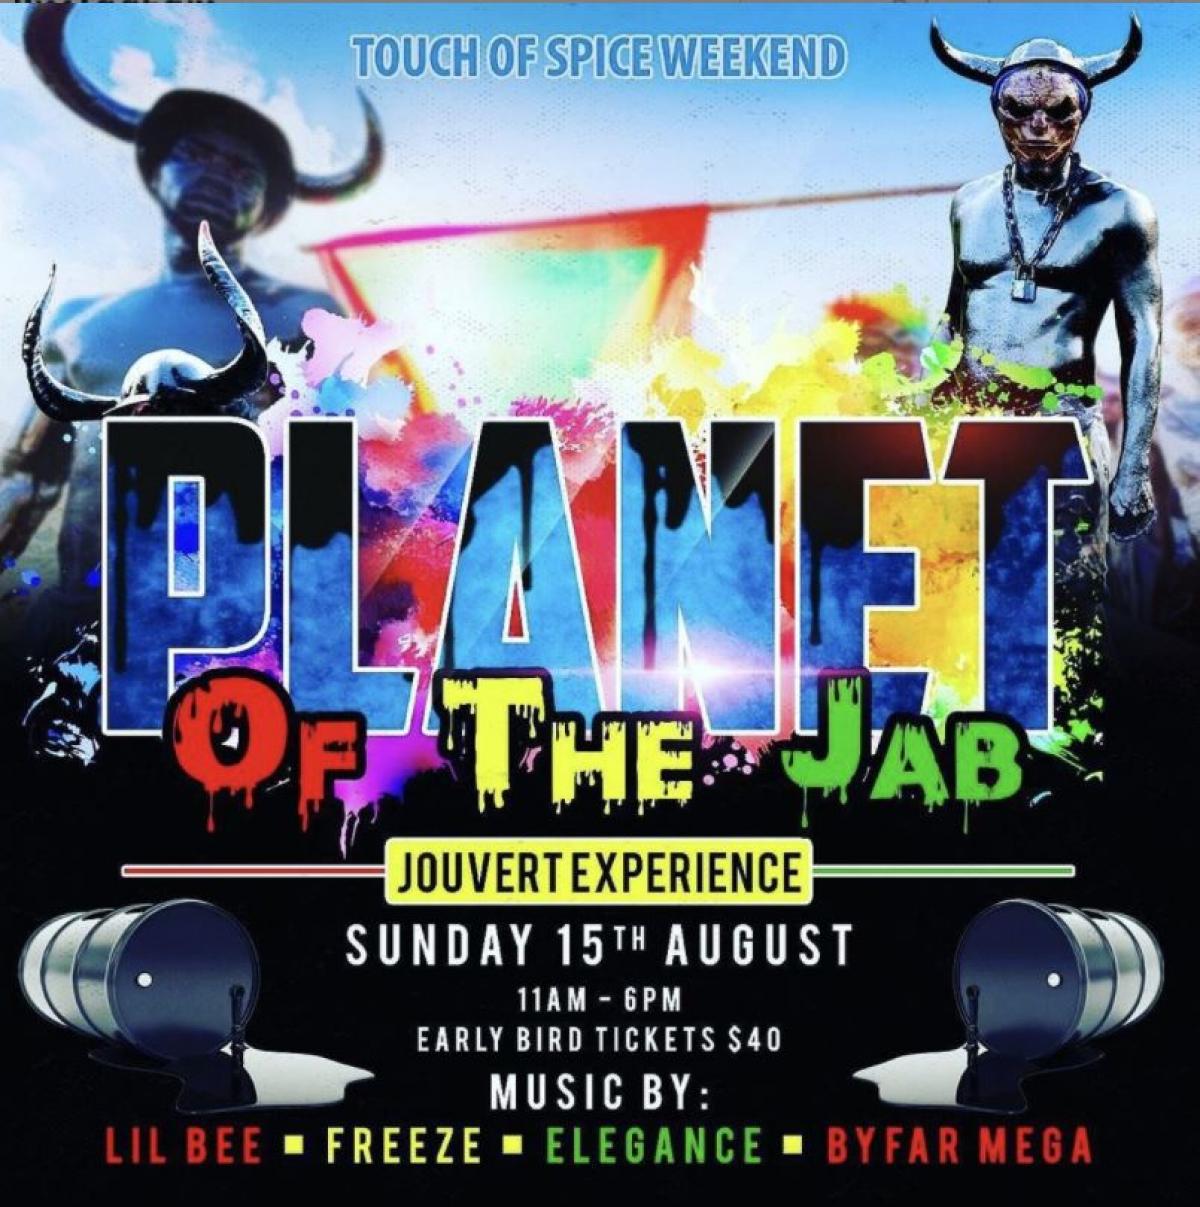 Touch Of Spice Weekend: Planet Of The Jab ”J'ouvert Experience" flyer or graphic.